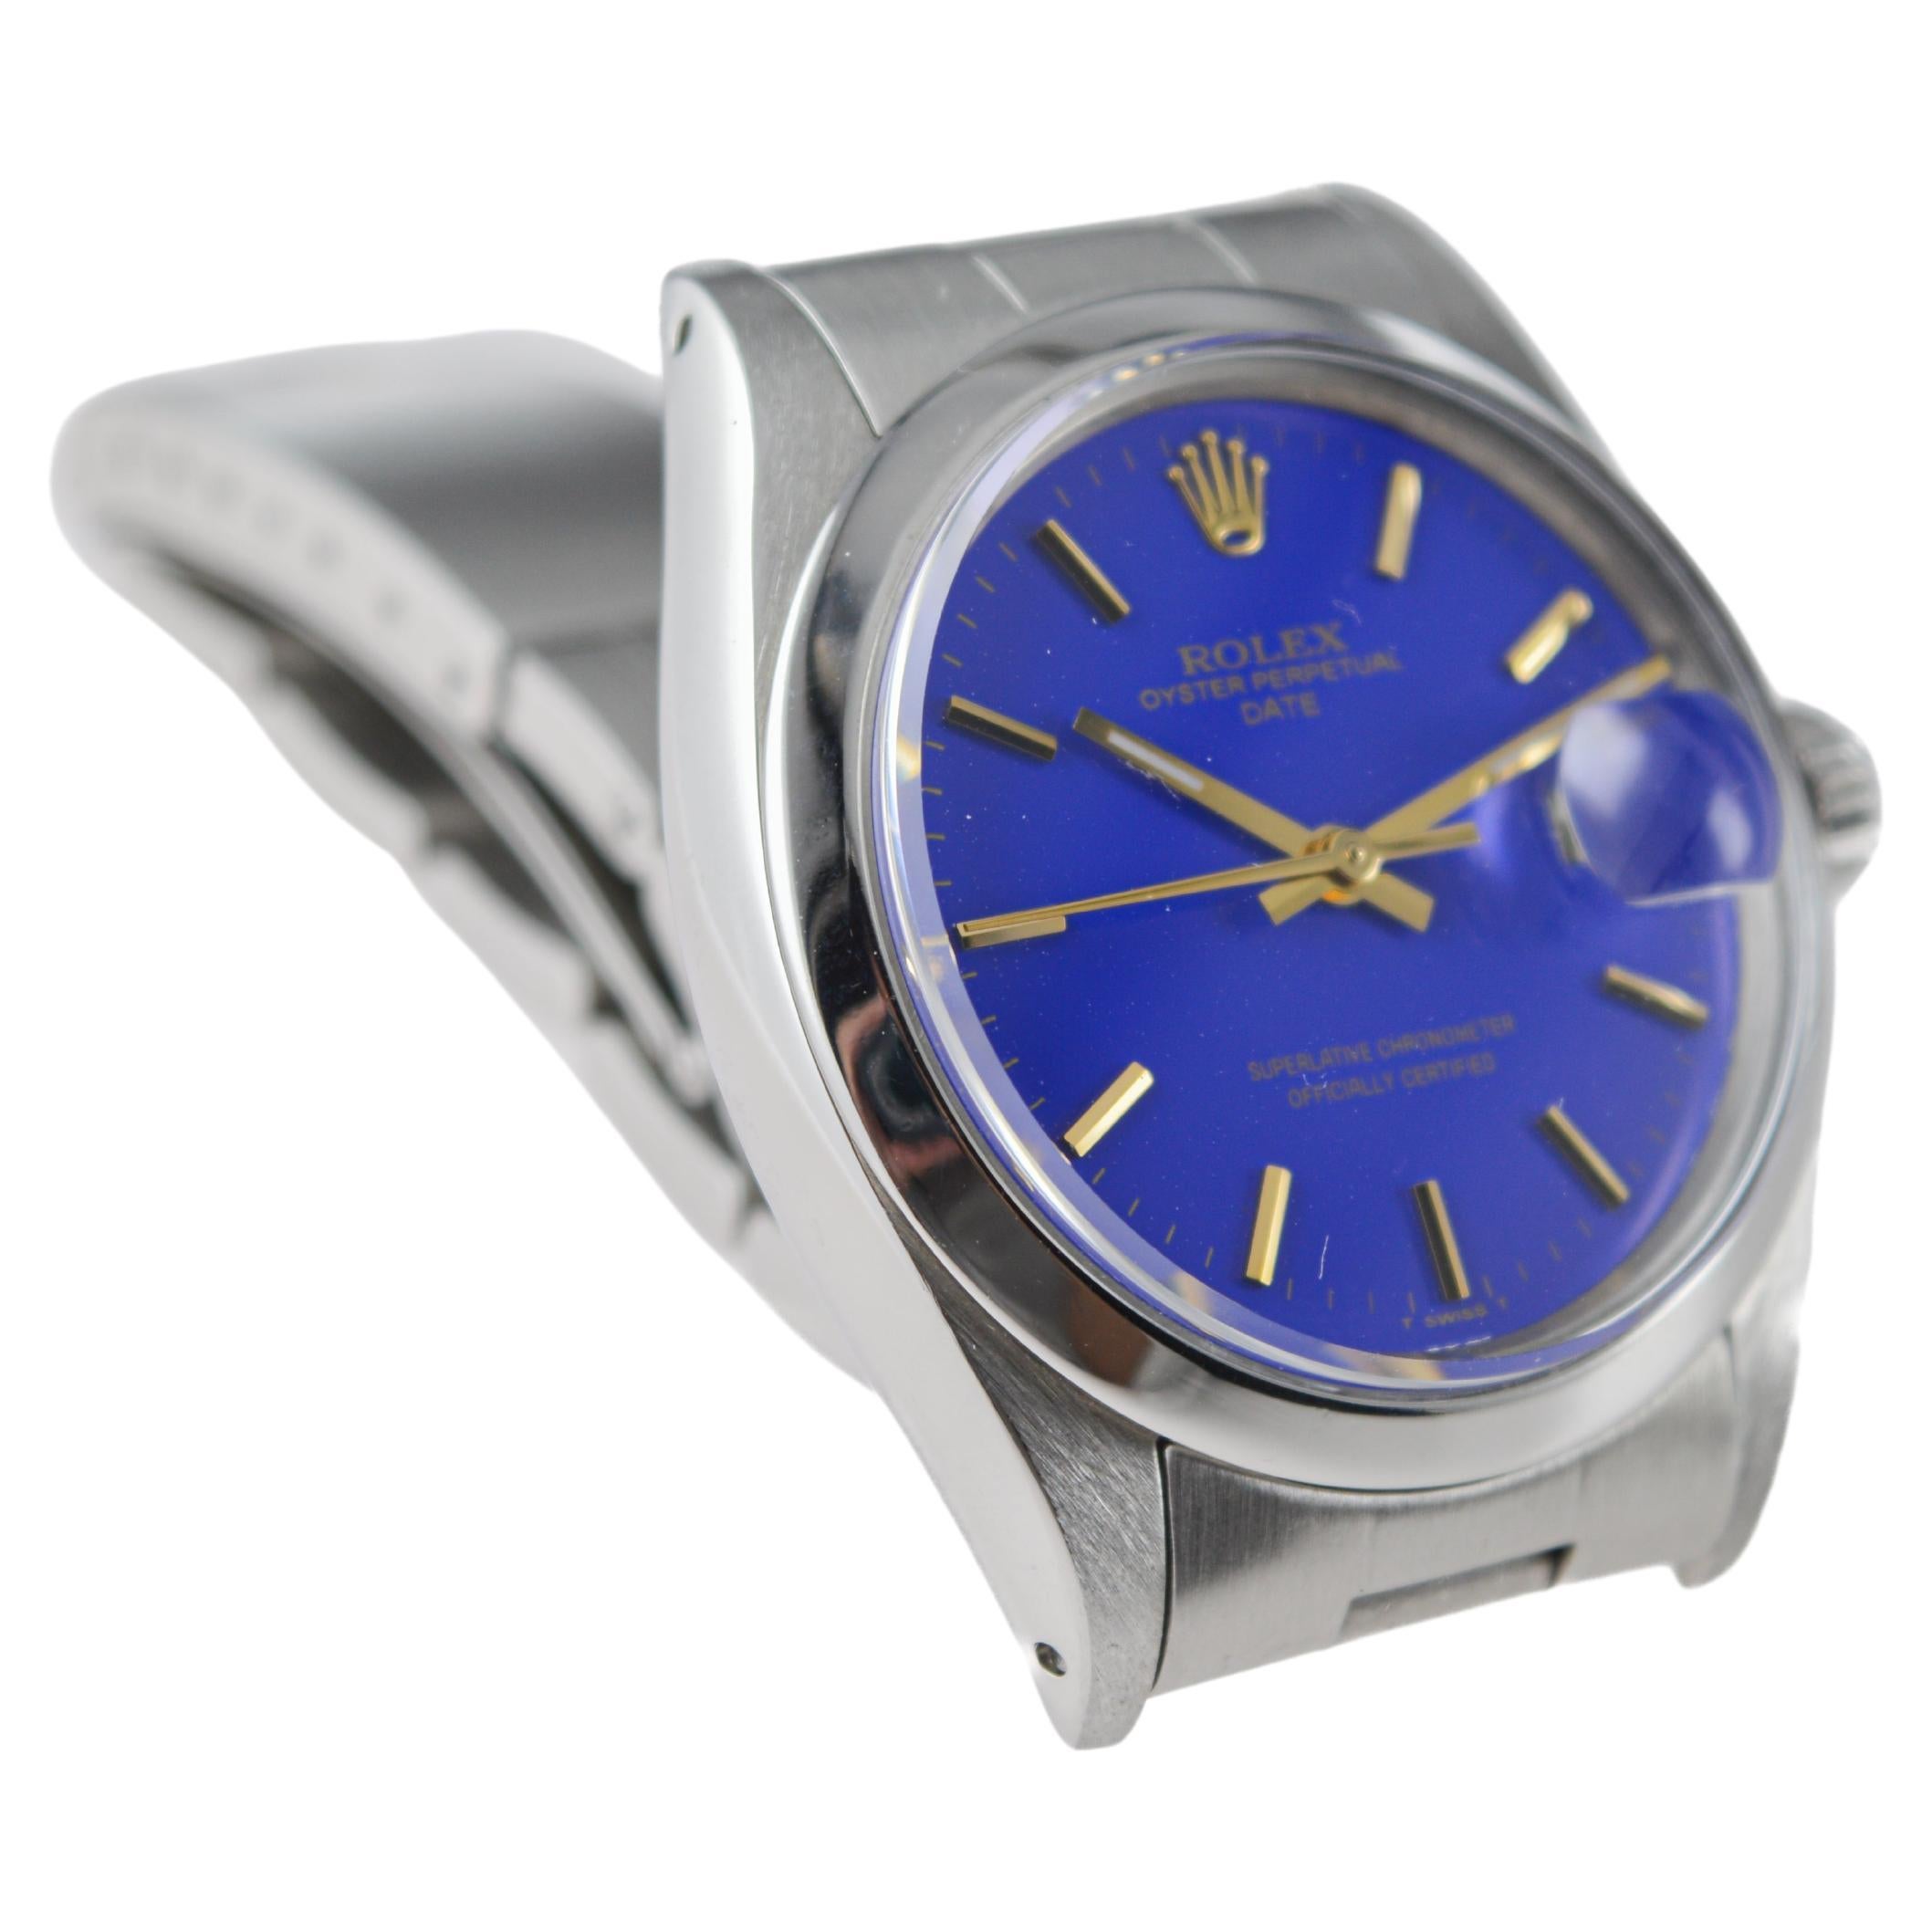 Rolex Steel Oyster Perpetual Date With Custom Made Deep Blue Dial circa 1960's For Sale 1